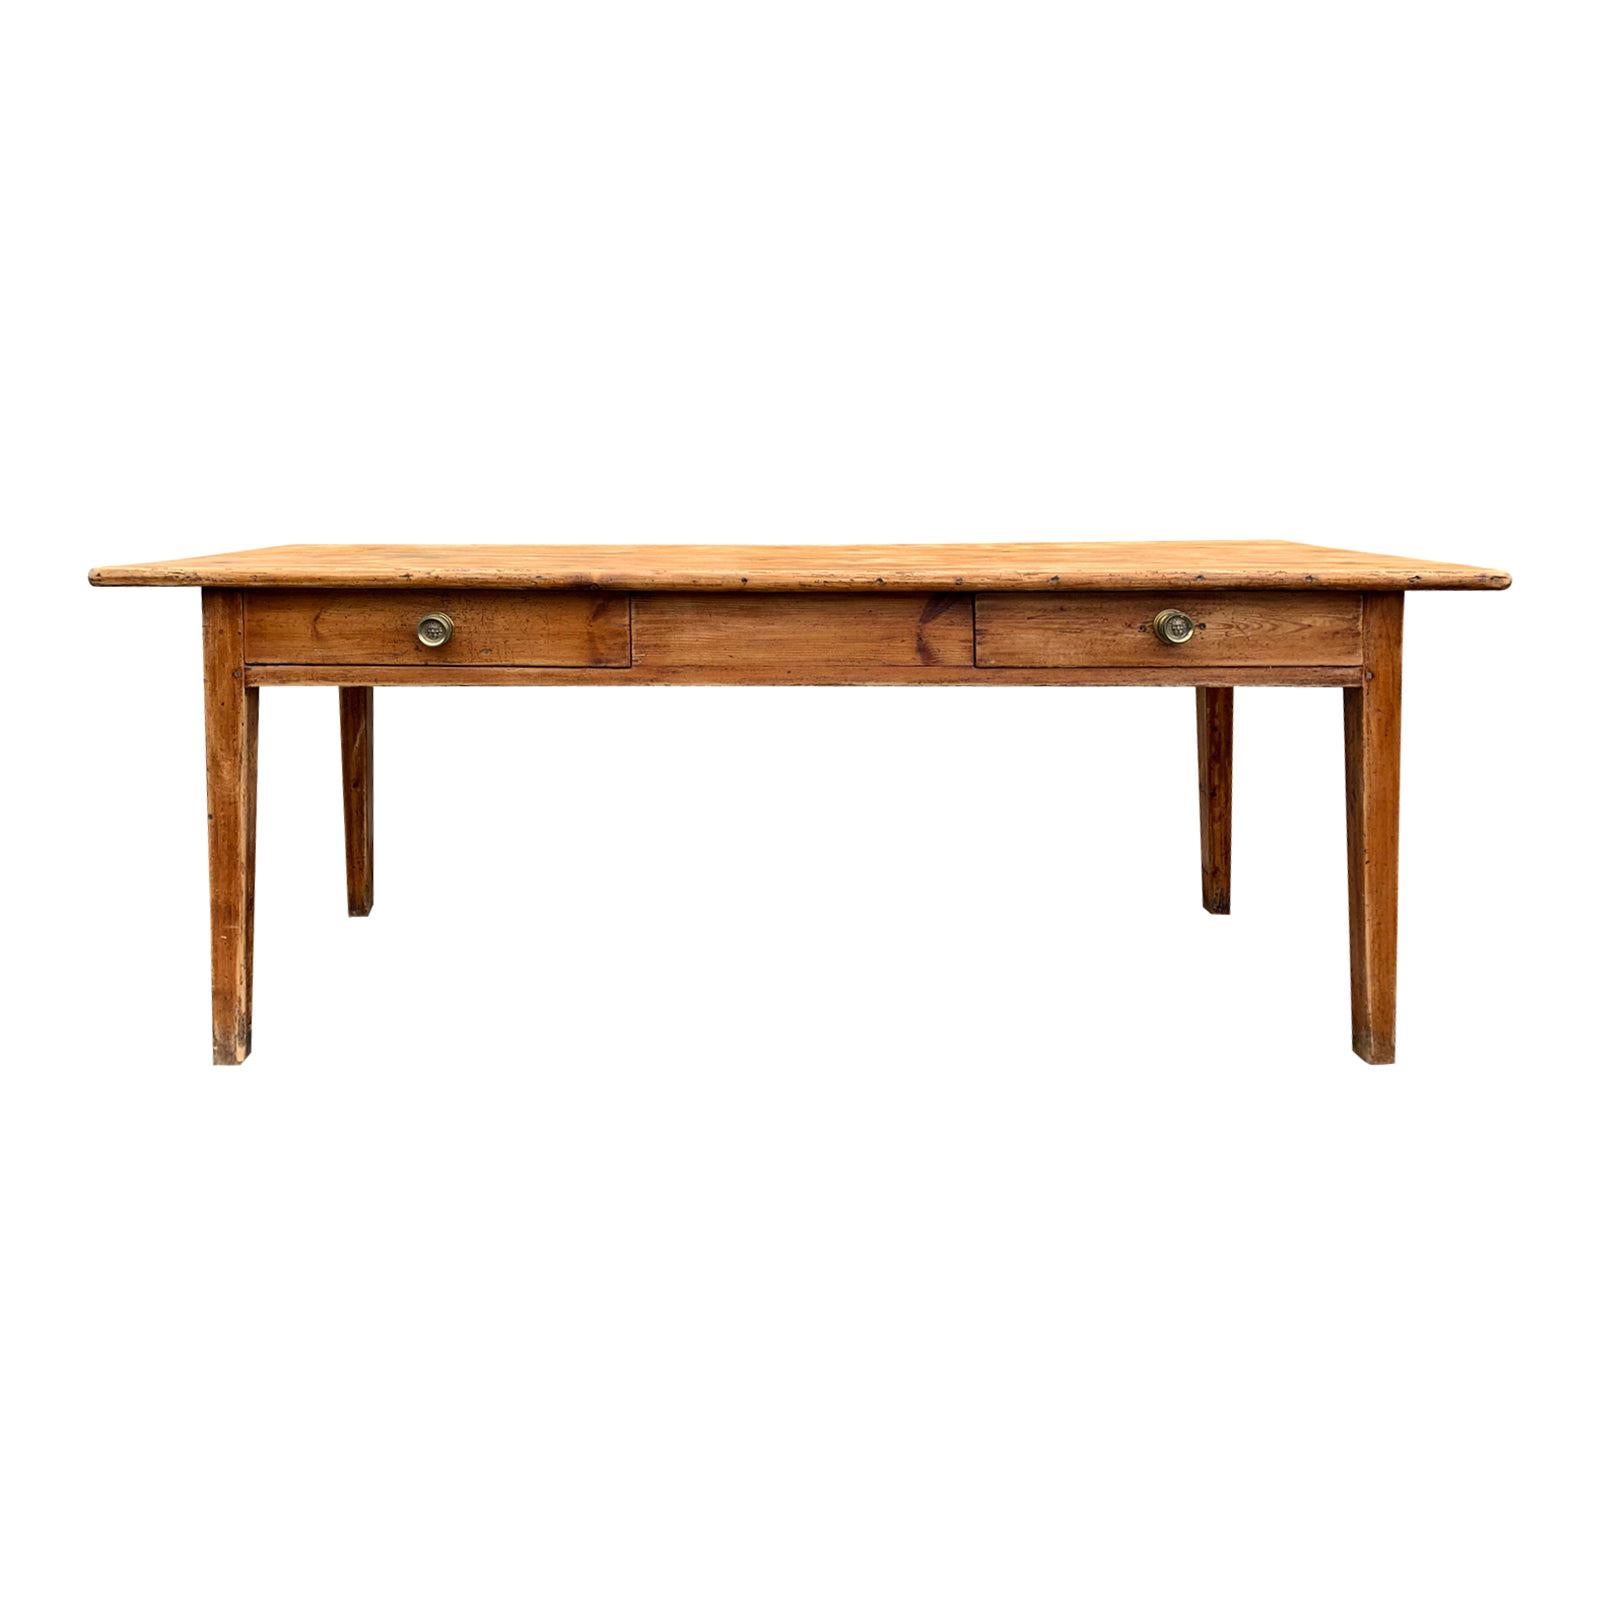 19th Century French Pine Farm Table with Two Drawers